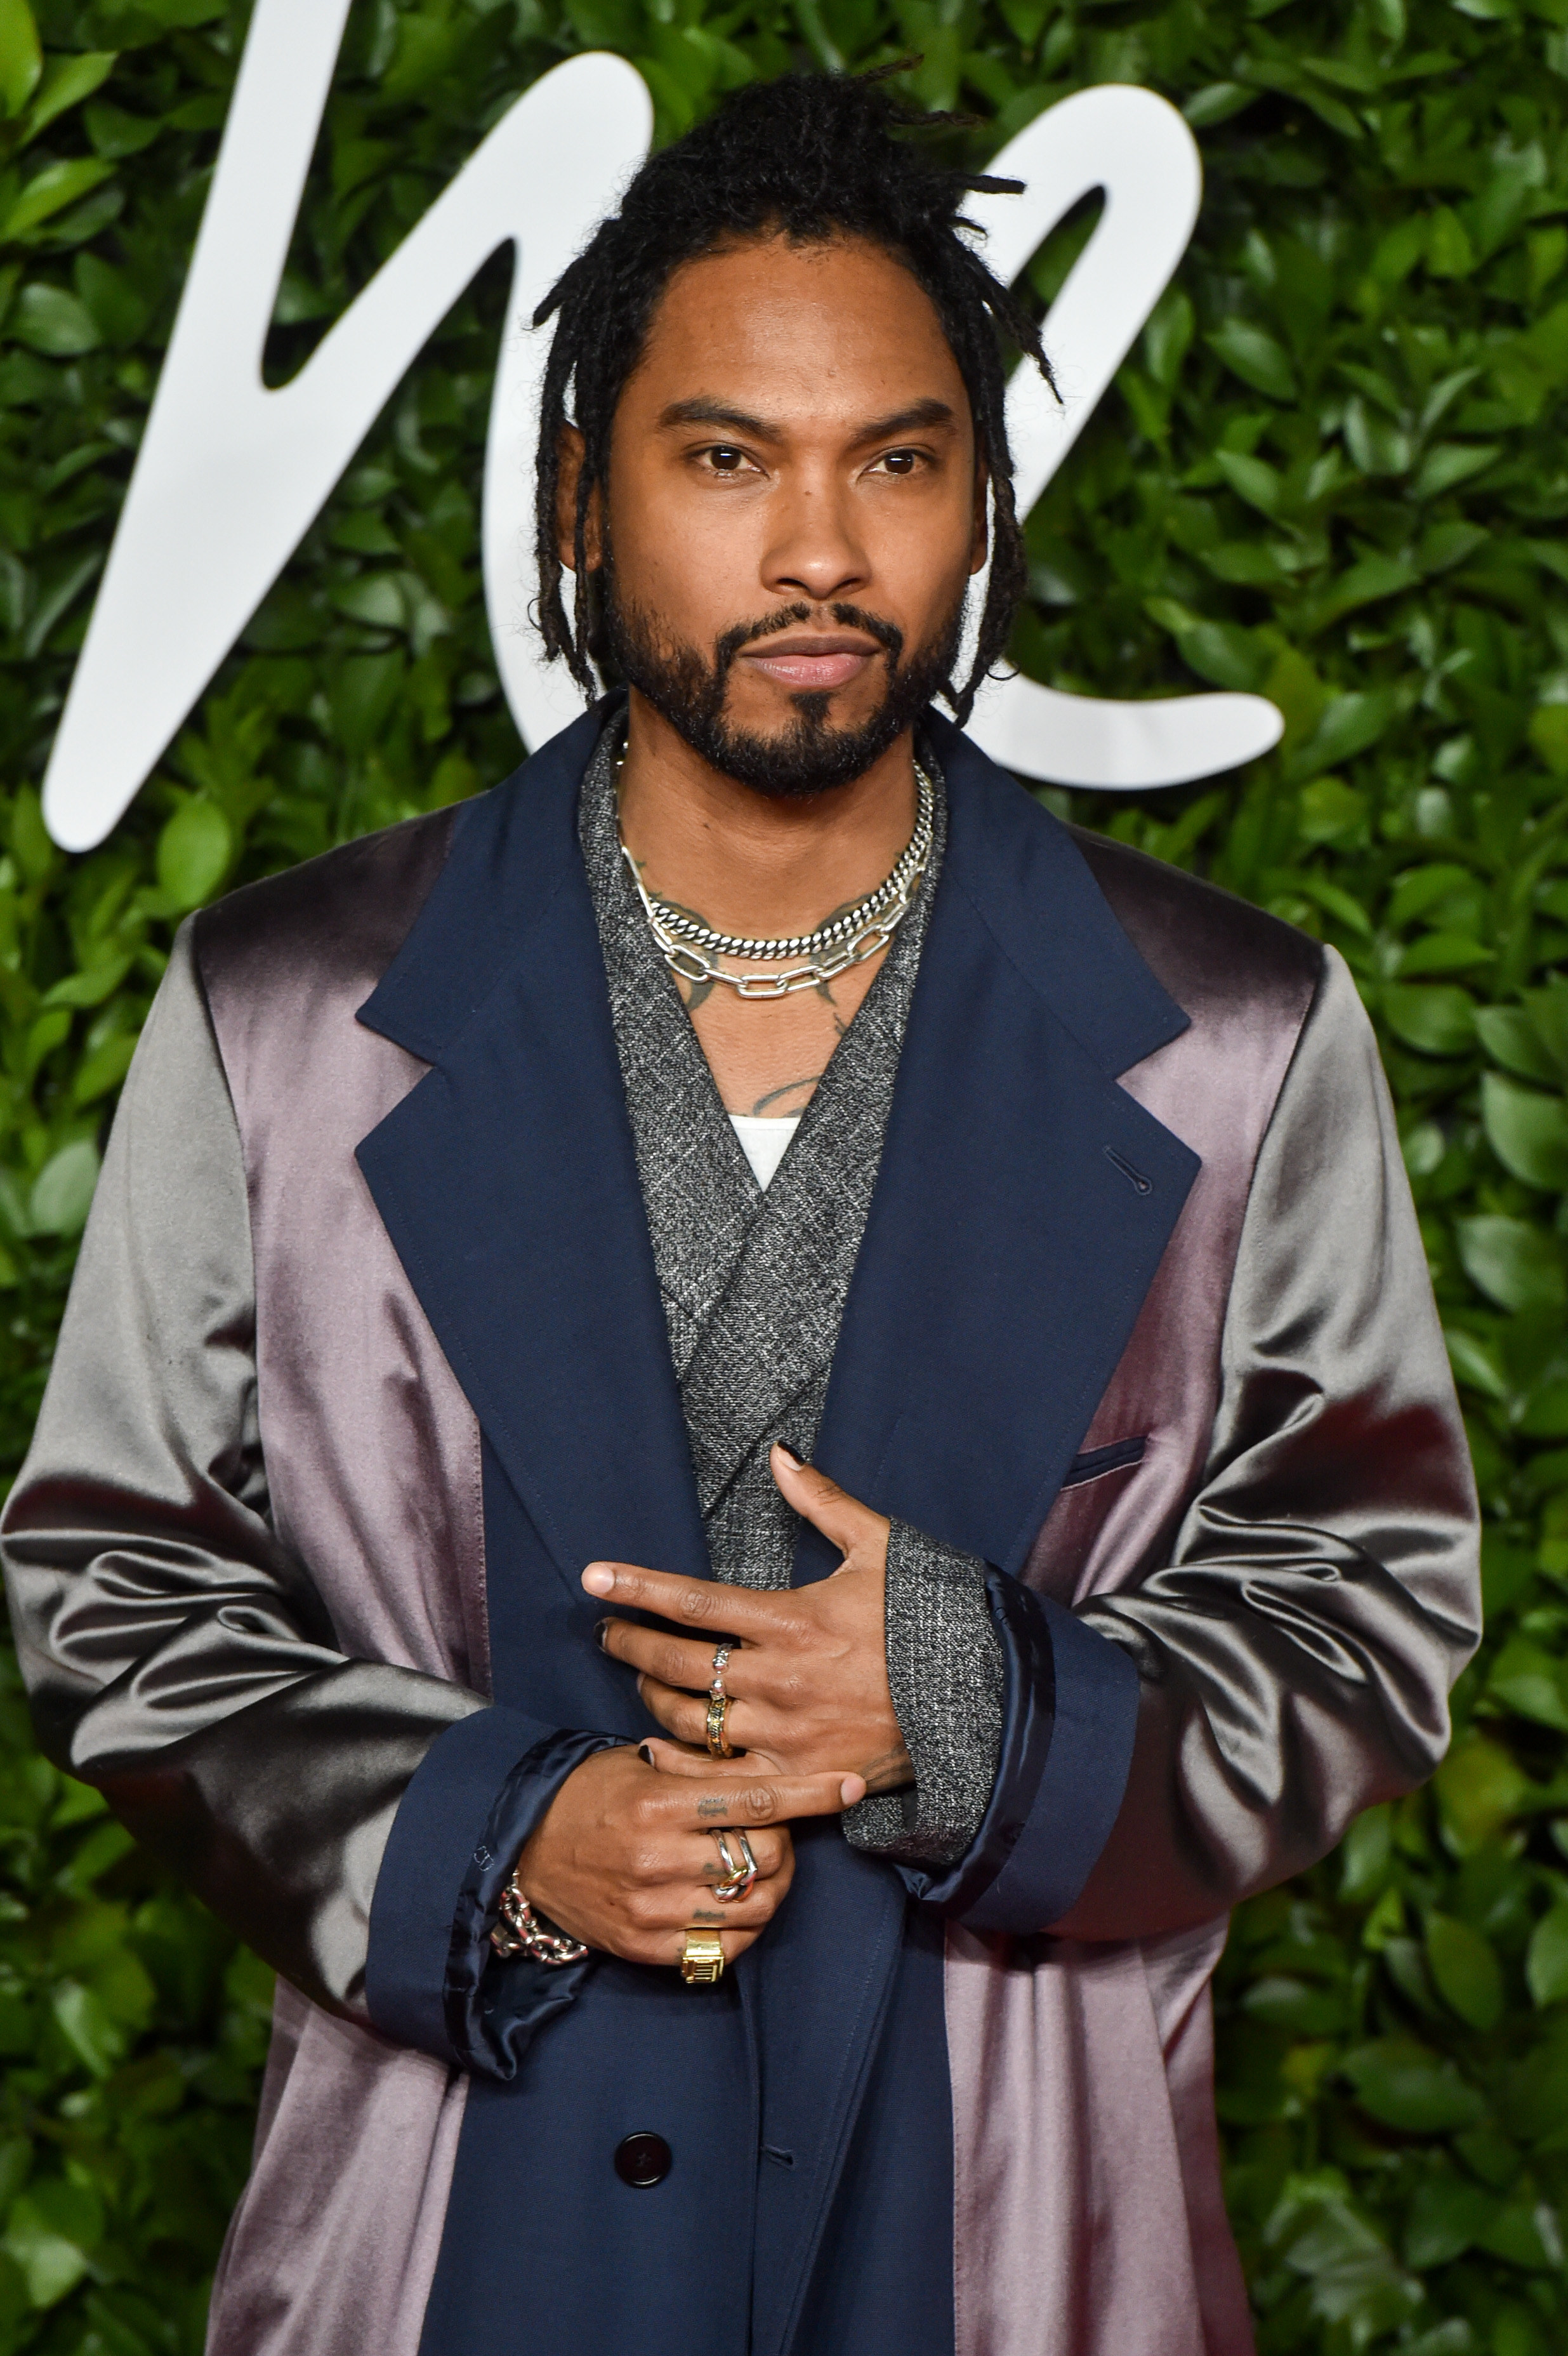 Miguel at the 2019 Fashion Awards